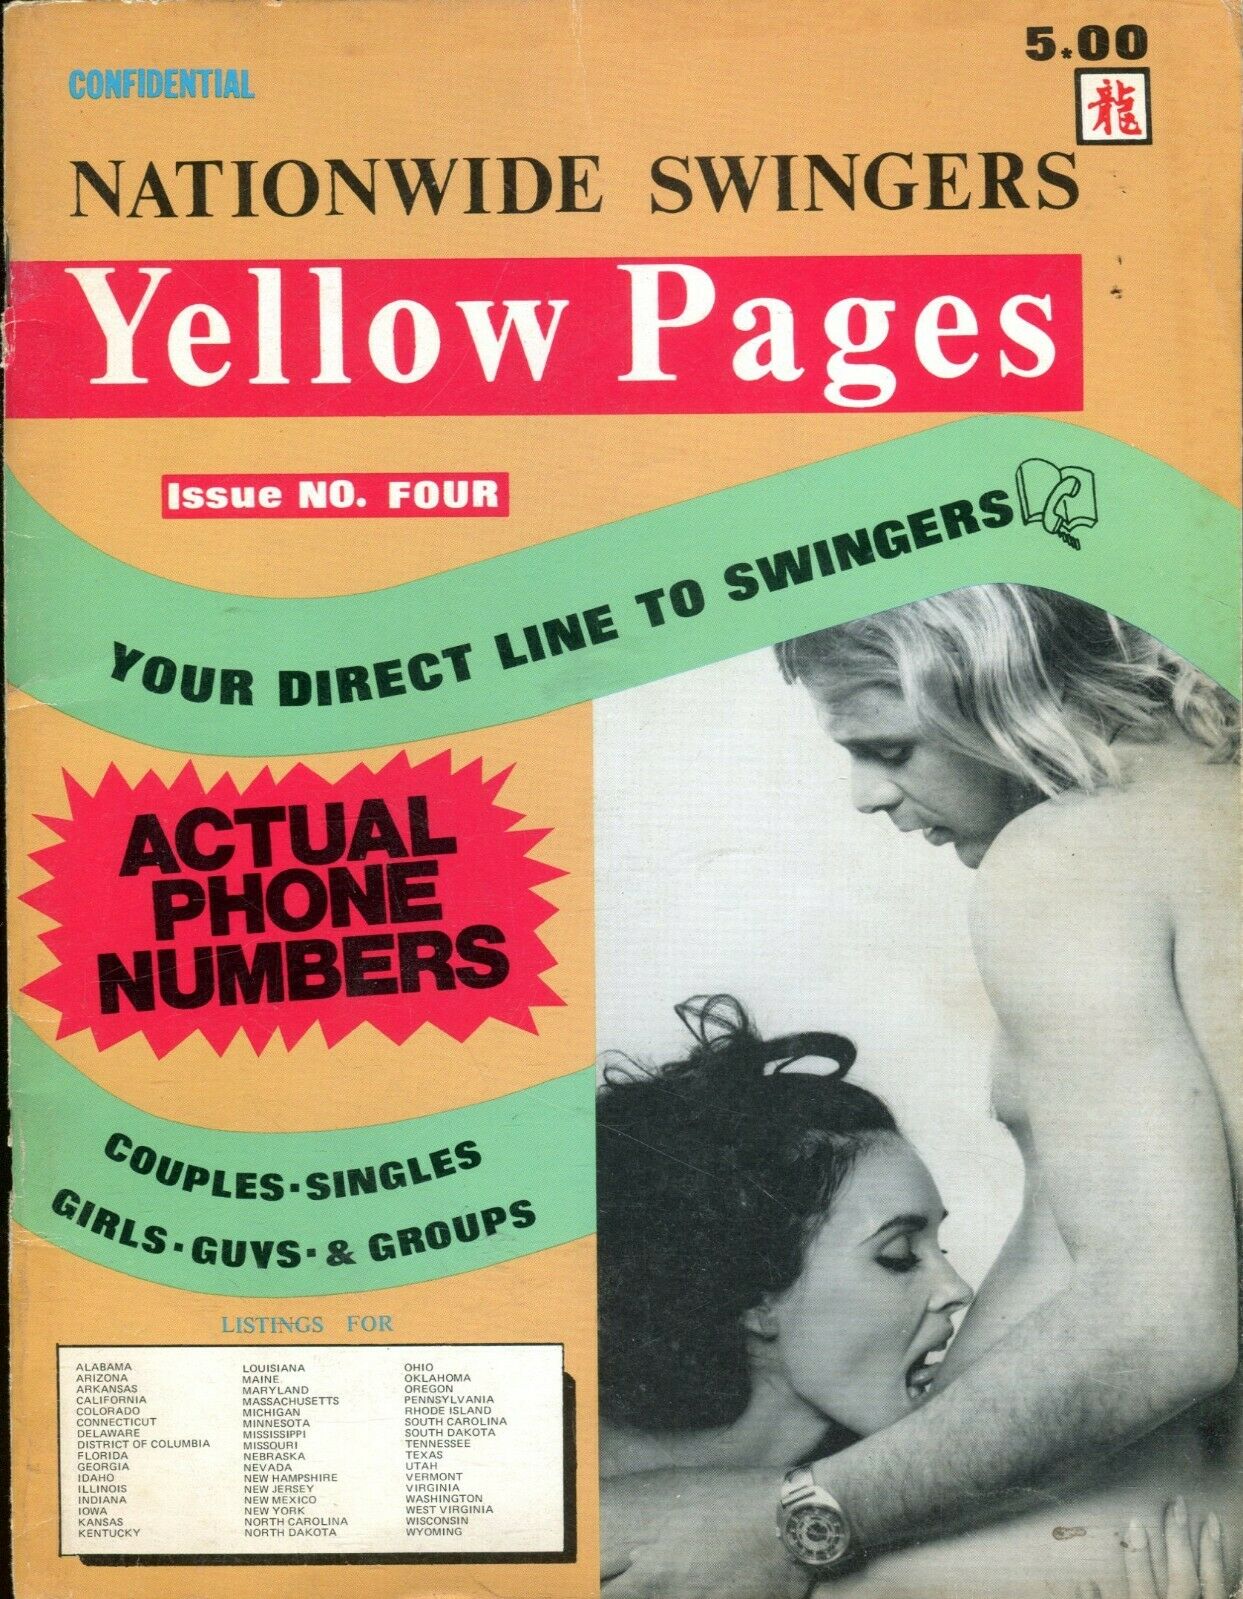 Nationwide Swingers Yellow Pages #4 1970s 071419lm-ep picture